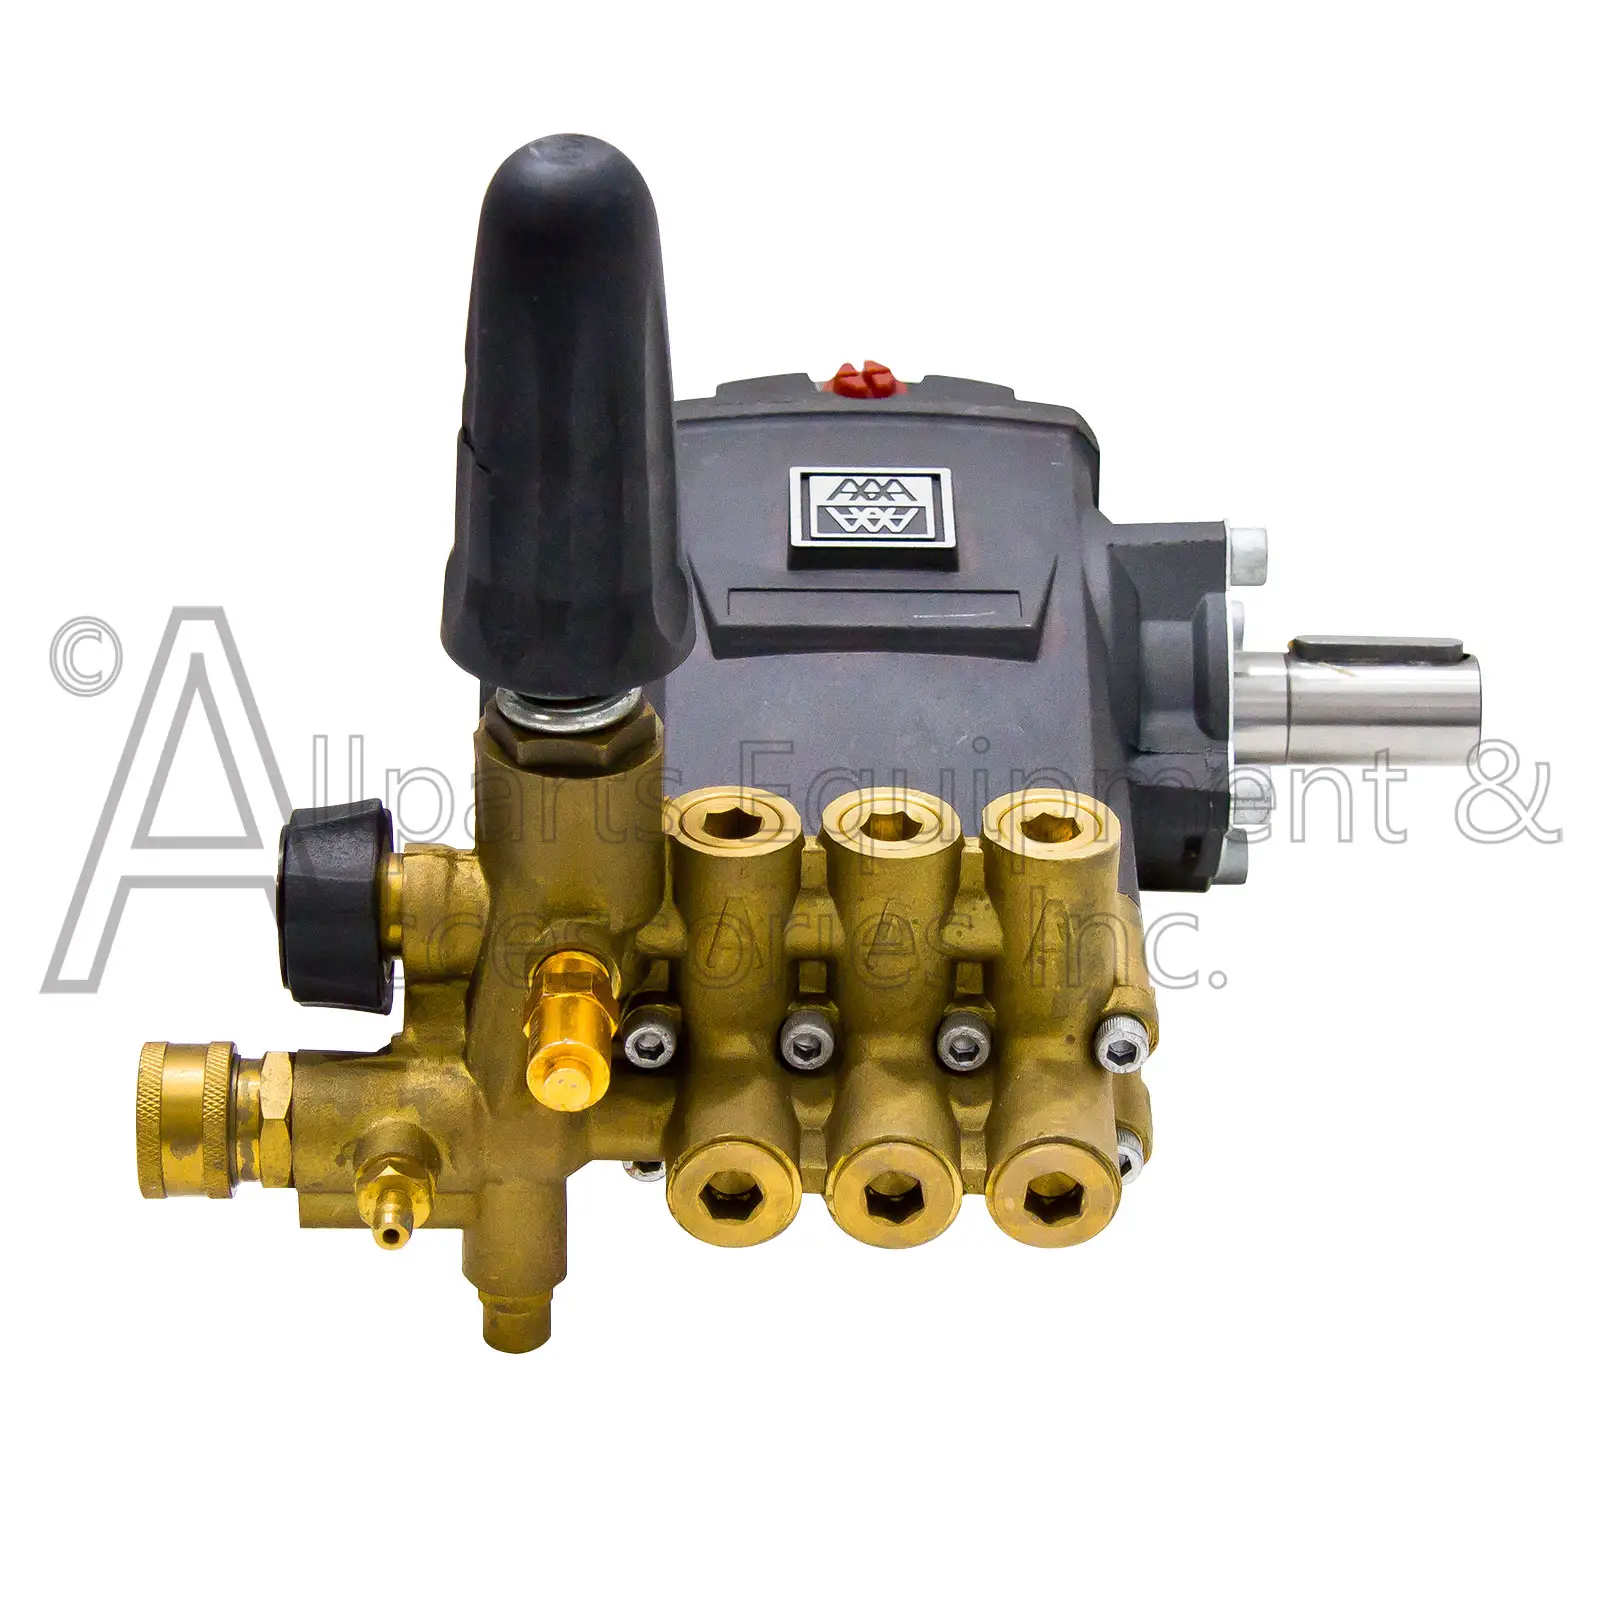 530007 Aaa Pump By Fna 4700 Psi 4.0 Gpm, Belt-Drive